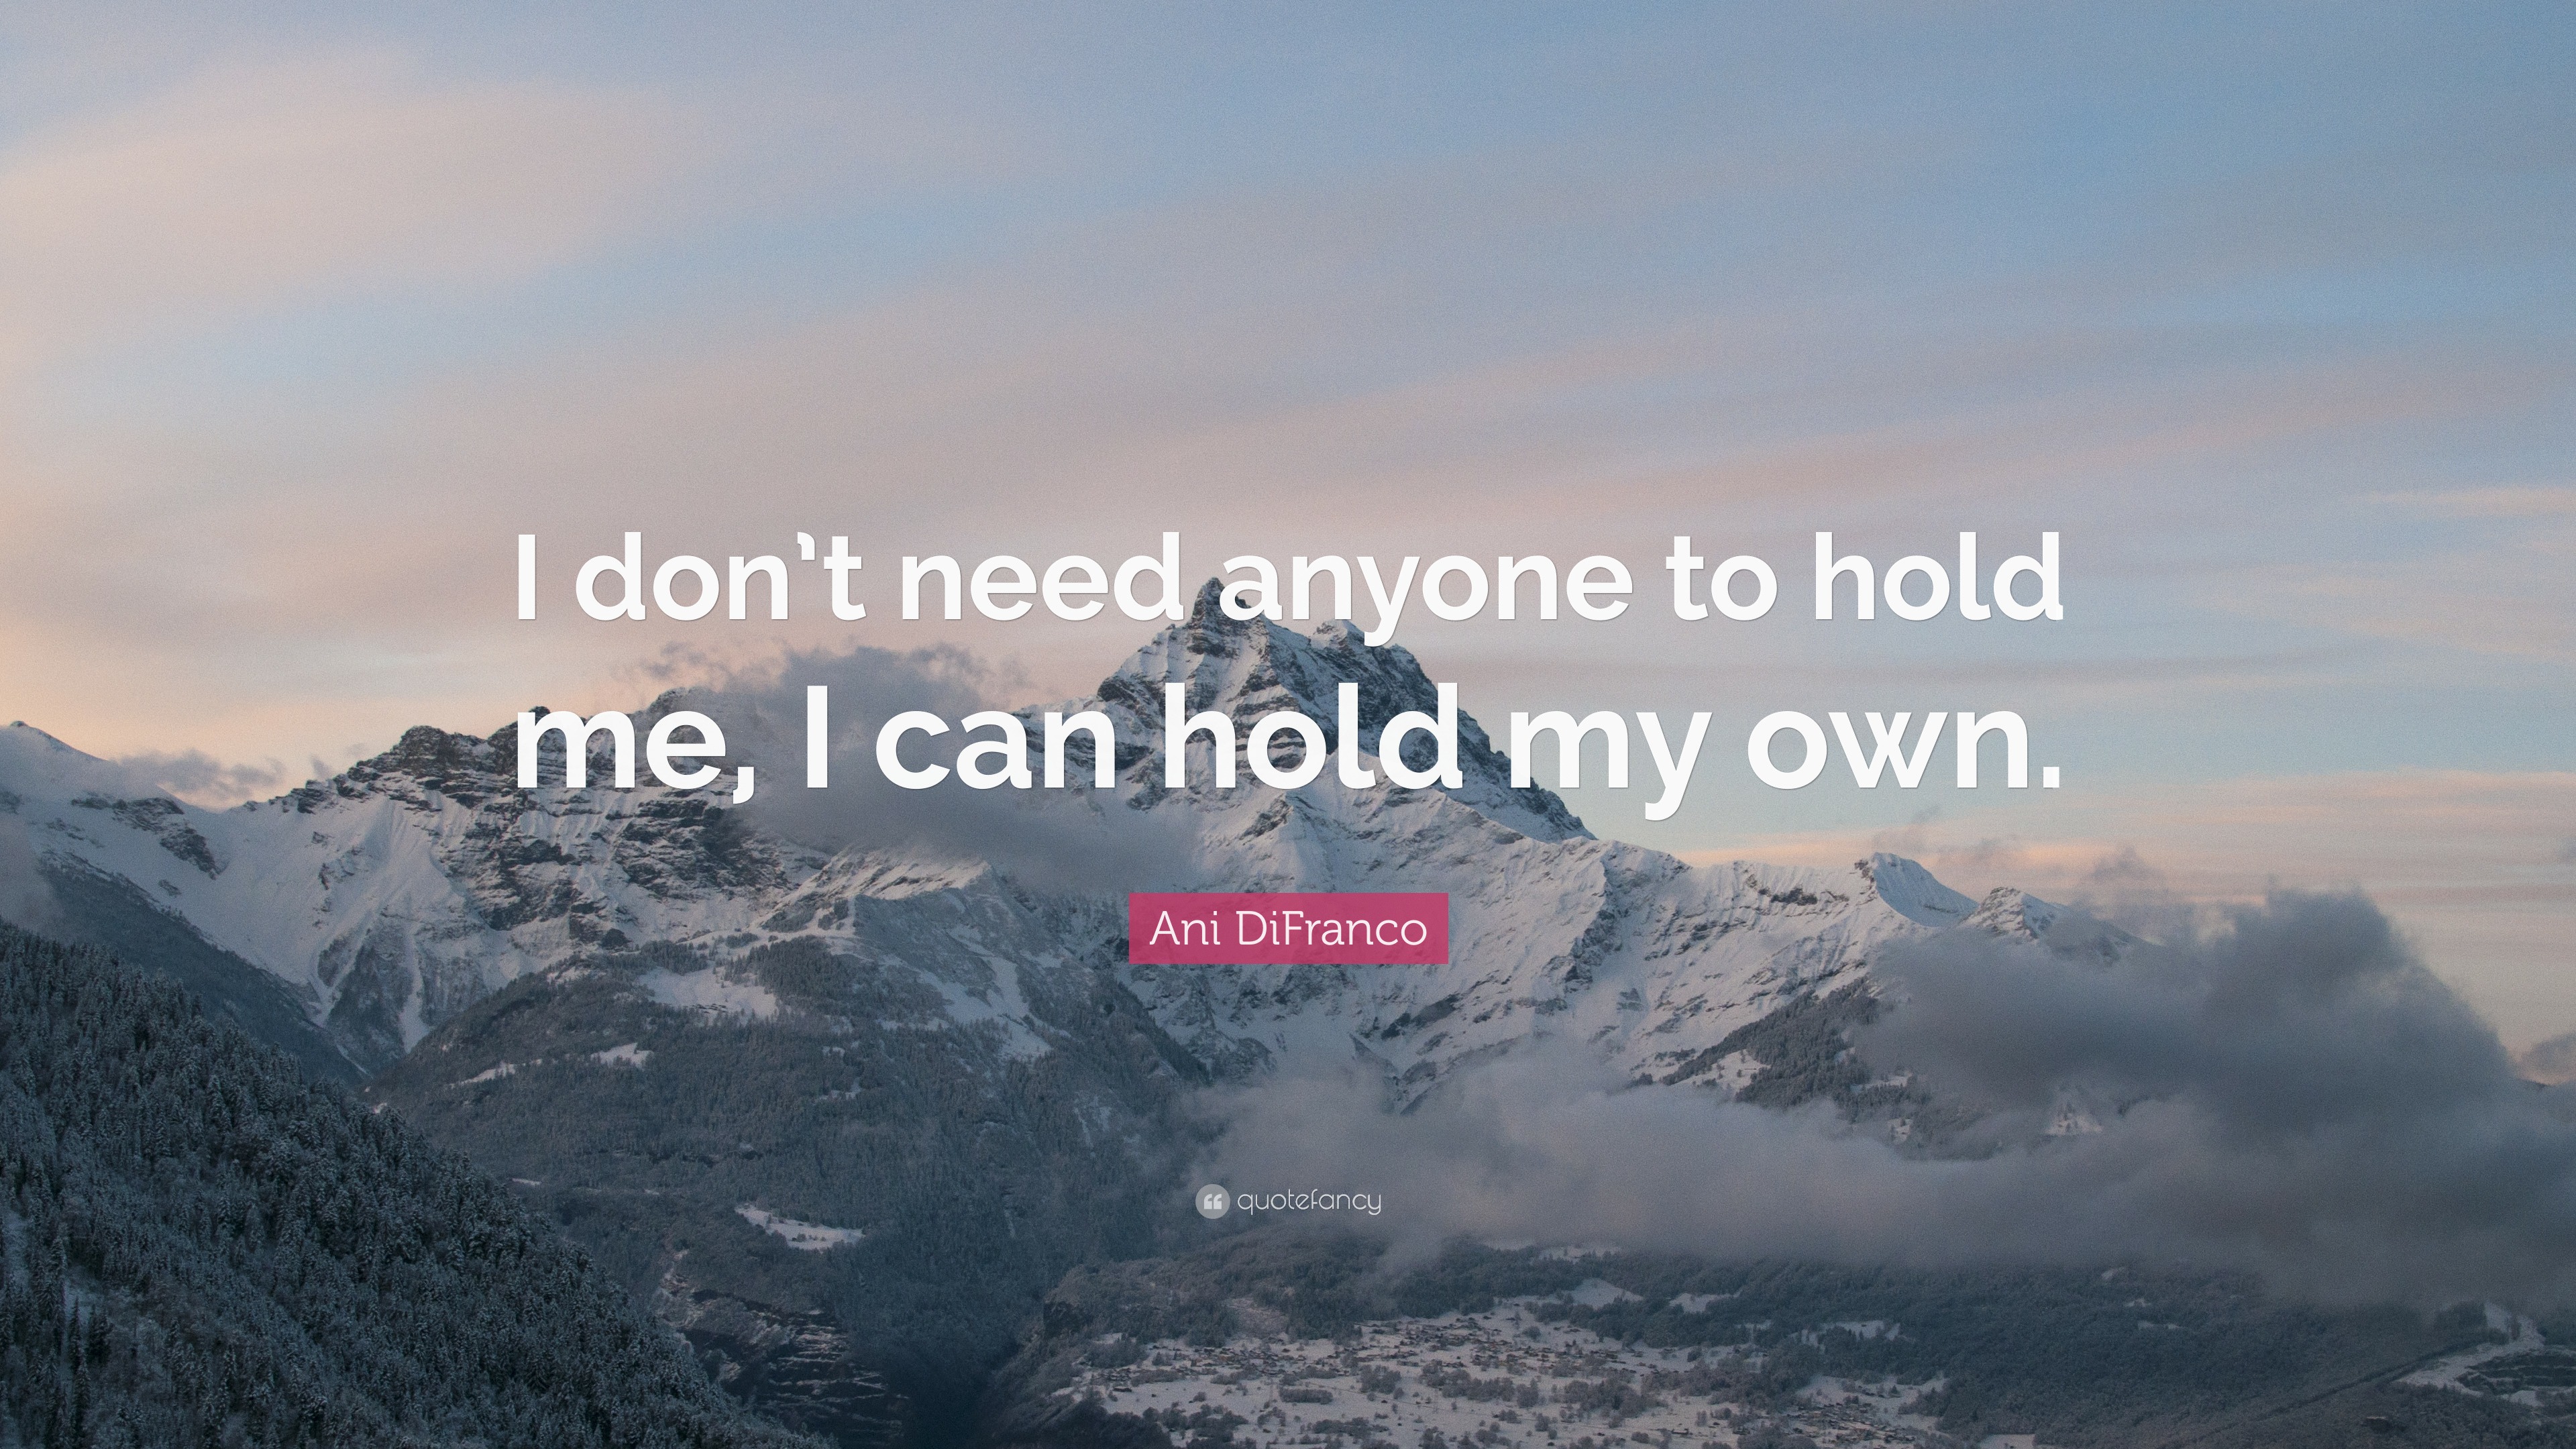 https://quotefancy.com/media/wallpaper/3840x2160/2164241-Ani-DiFranco-Quote-I-don-t-need-anyone-to-hold-me-I-can-hold-my.jpg